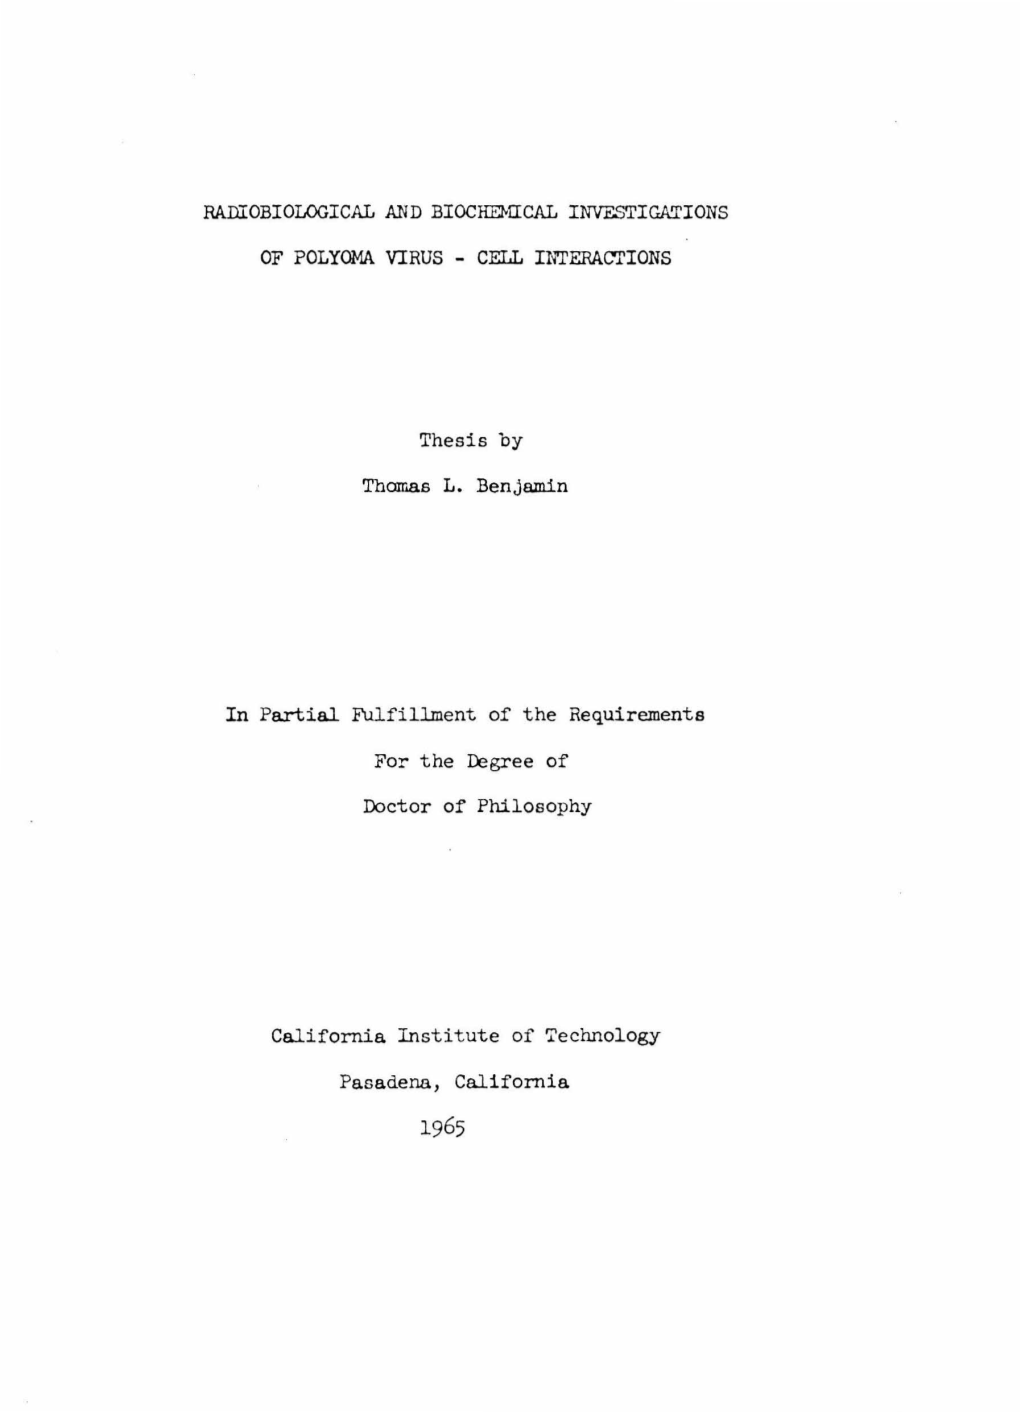 Thesis by Thomas L. Benjamin in Partial Fulfillment of The